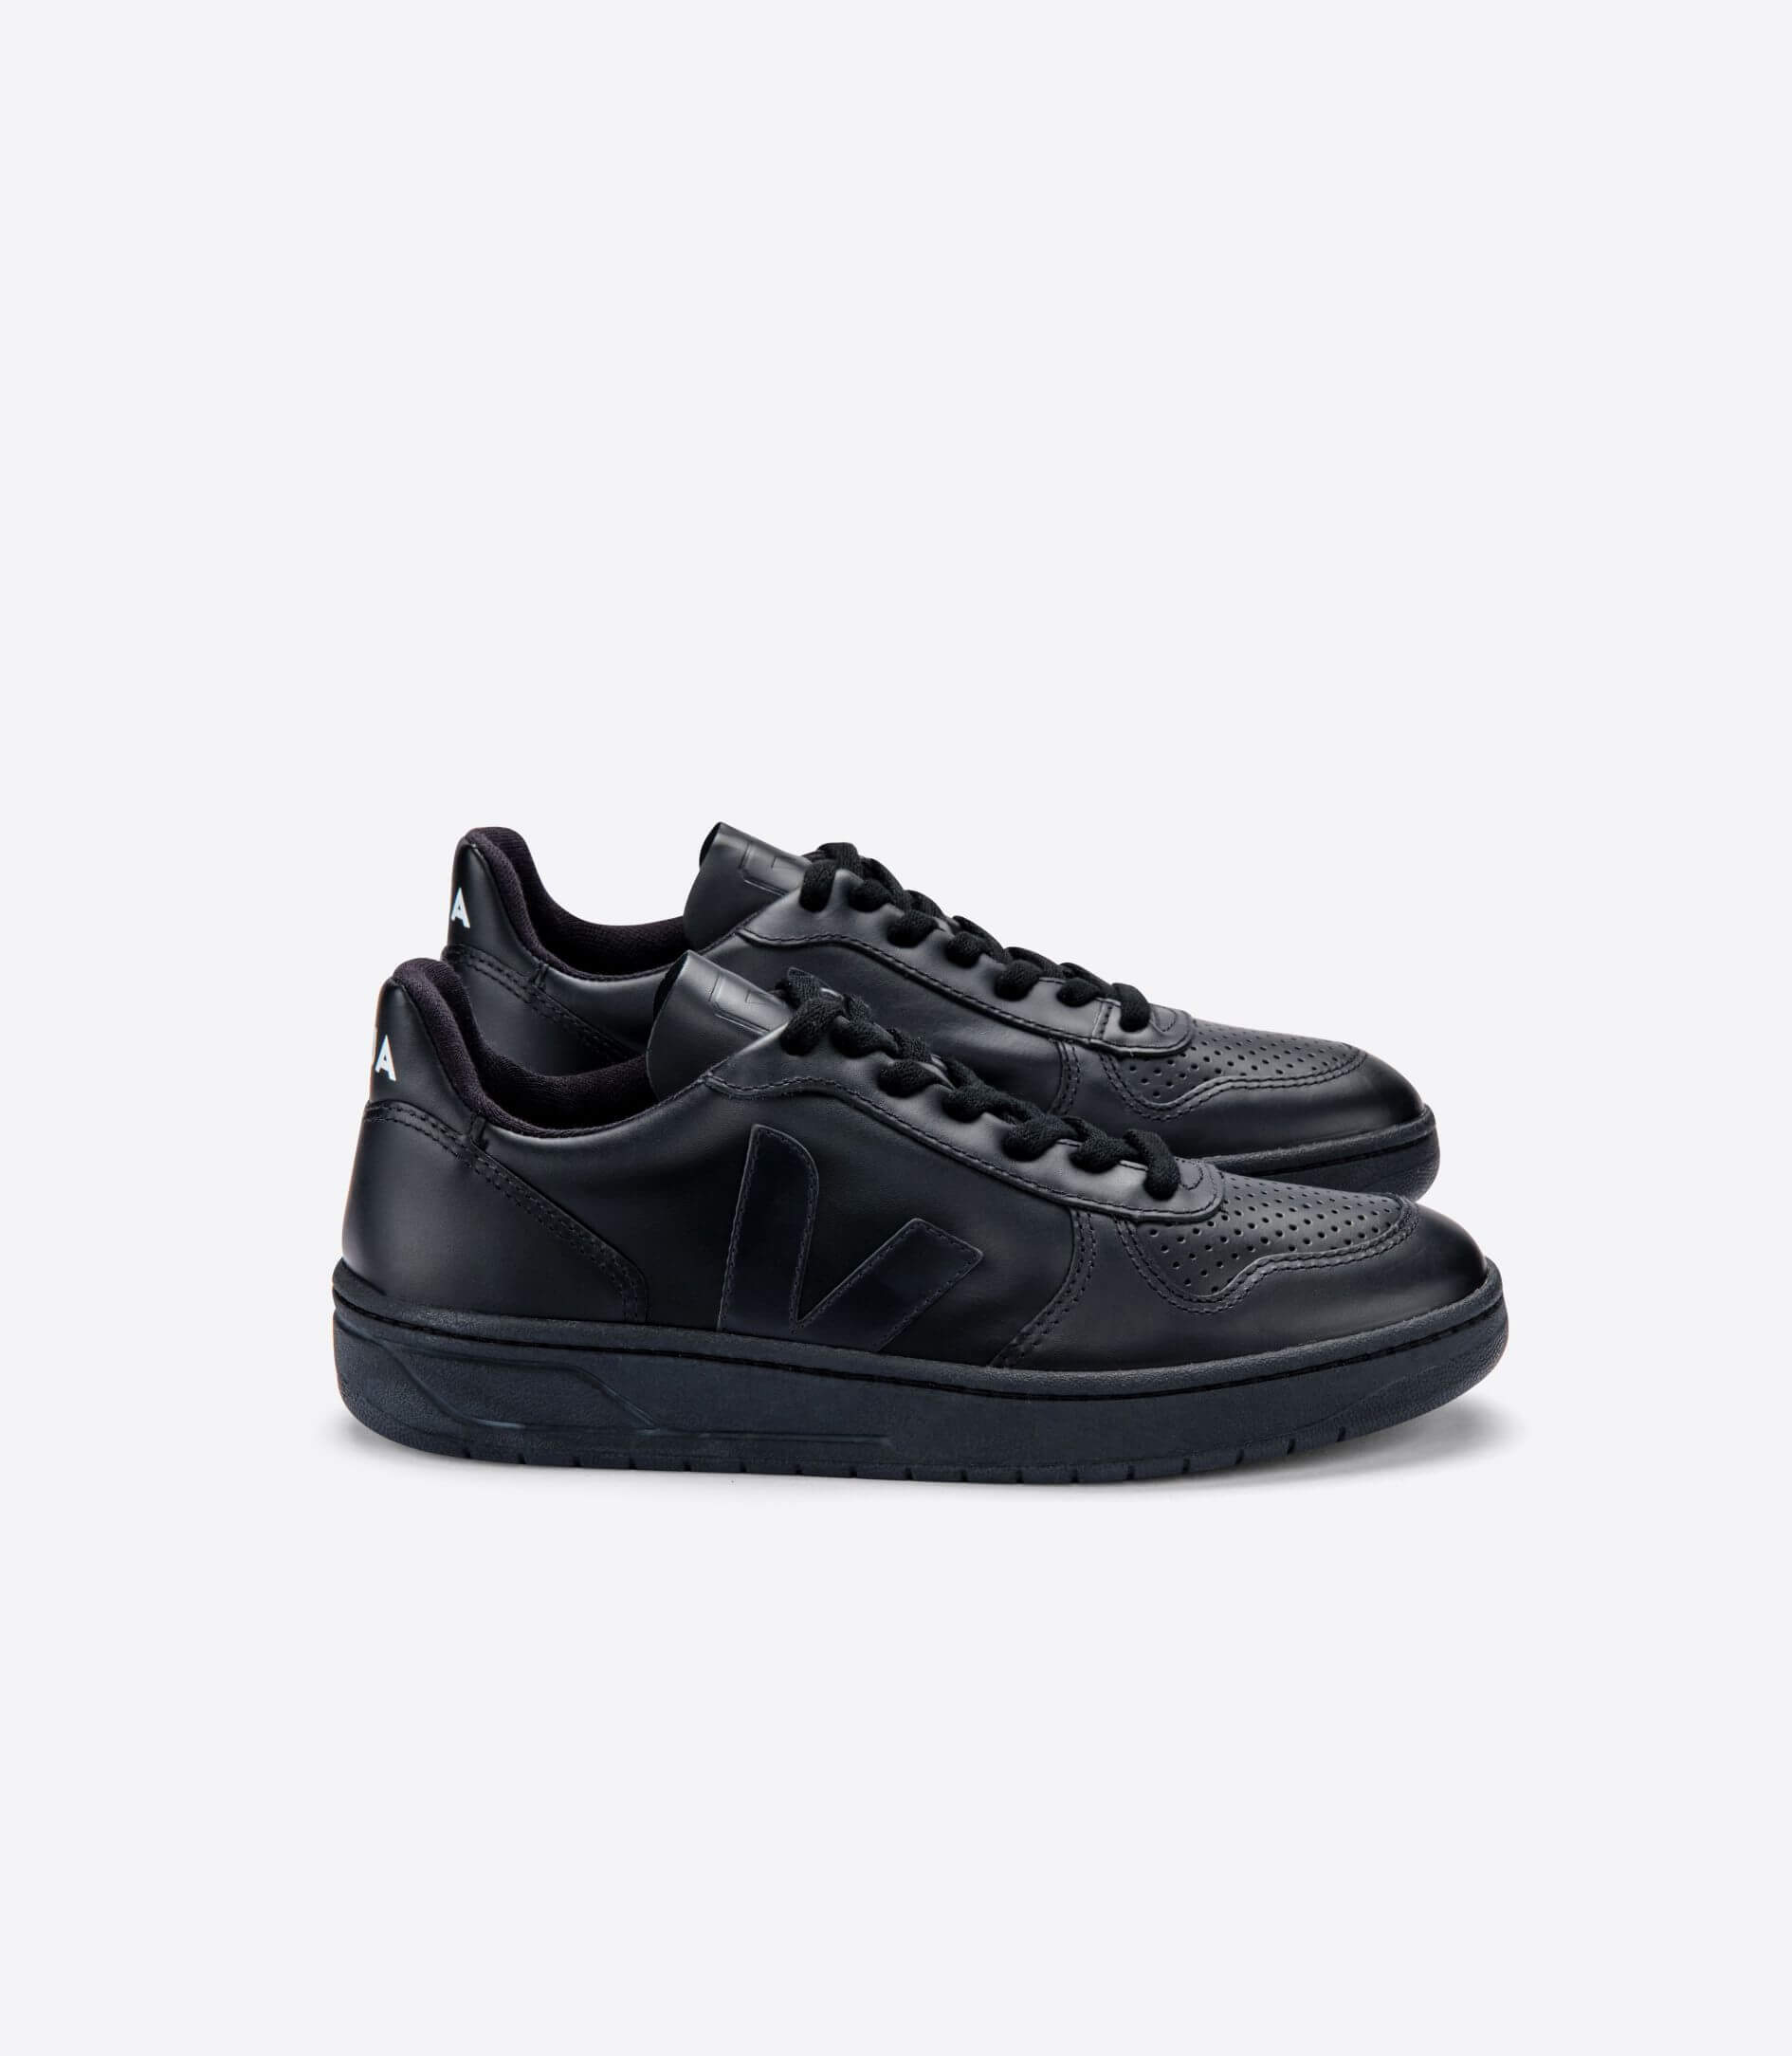 shoes that are similar to air force ones